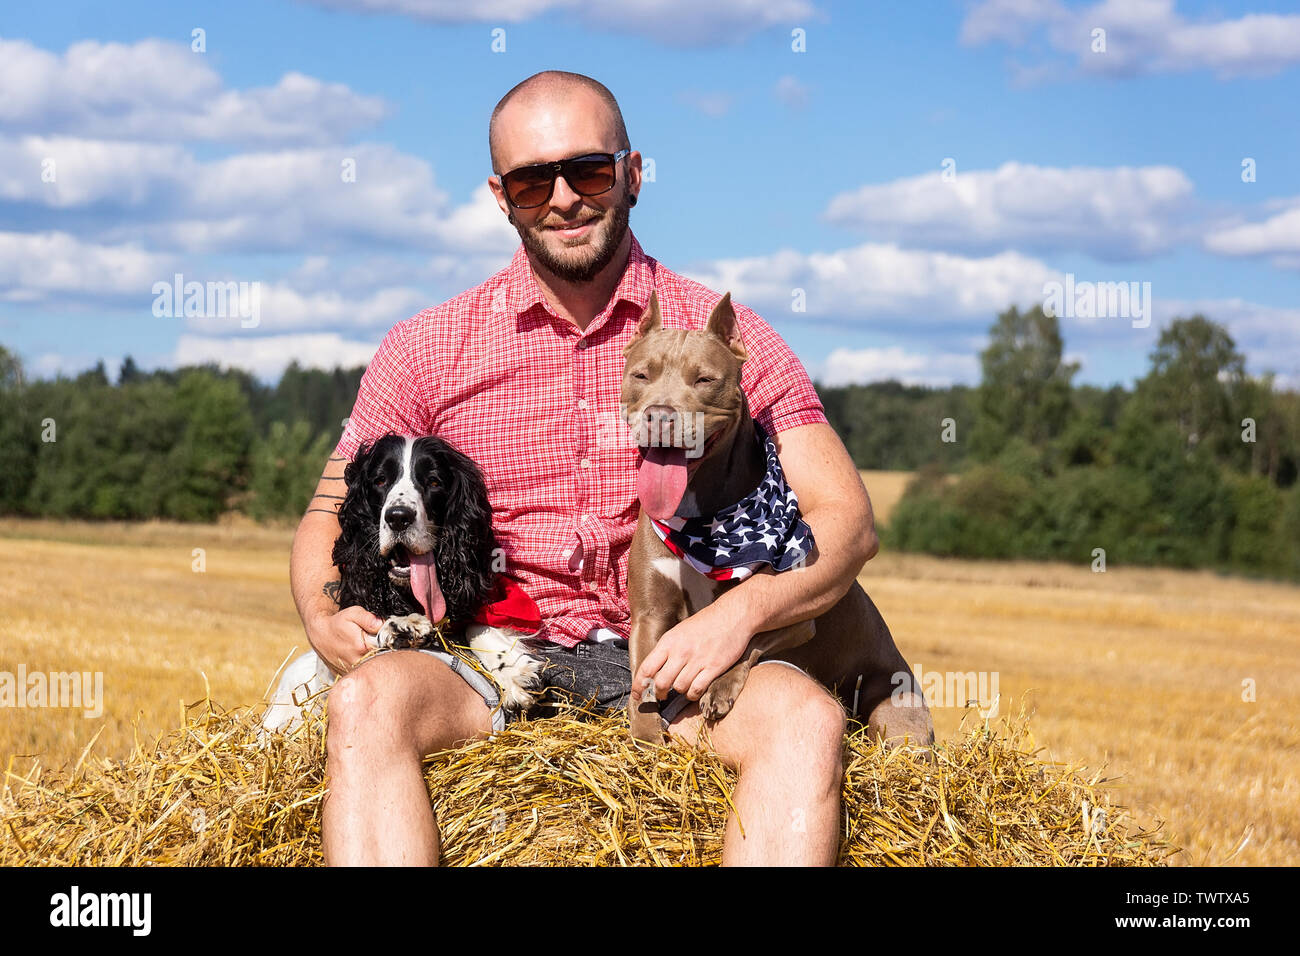 Man with a fighting dog on the hay against the sky Stock Photo